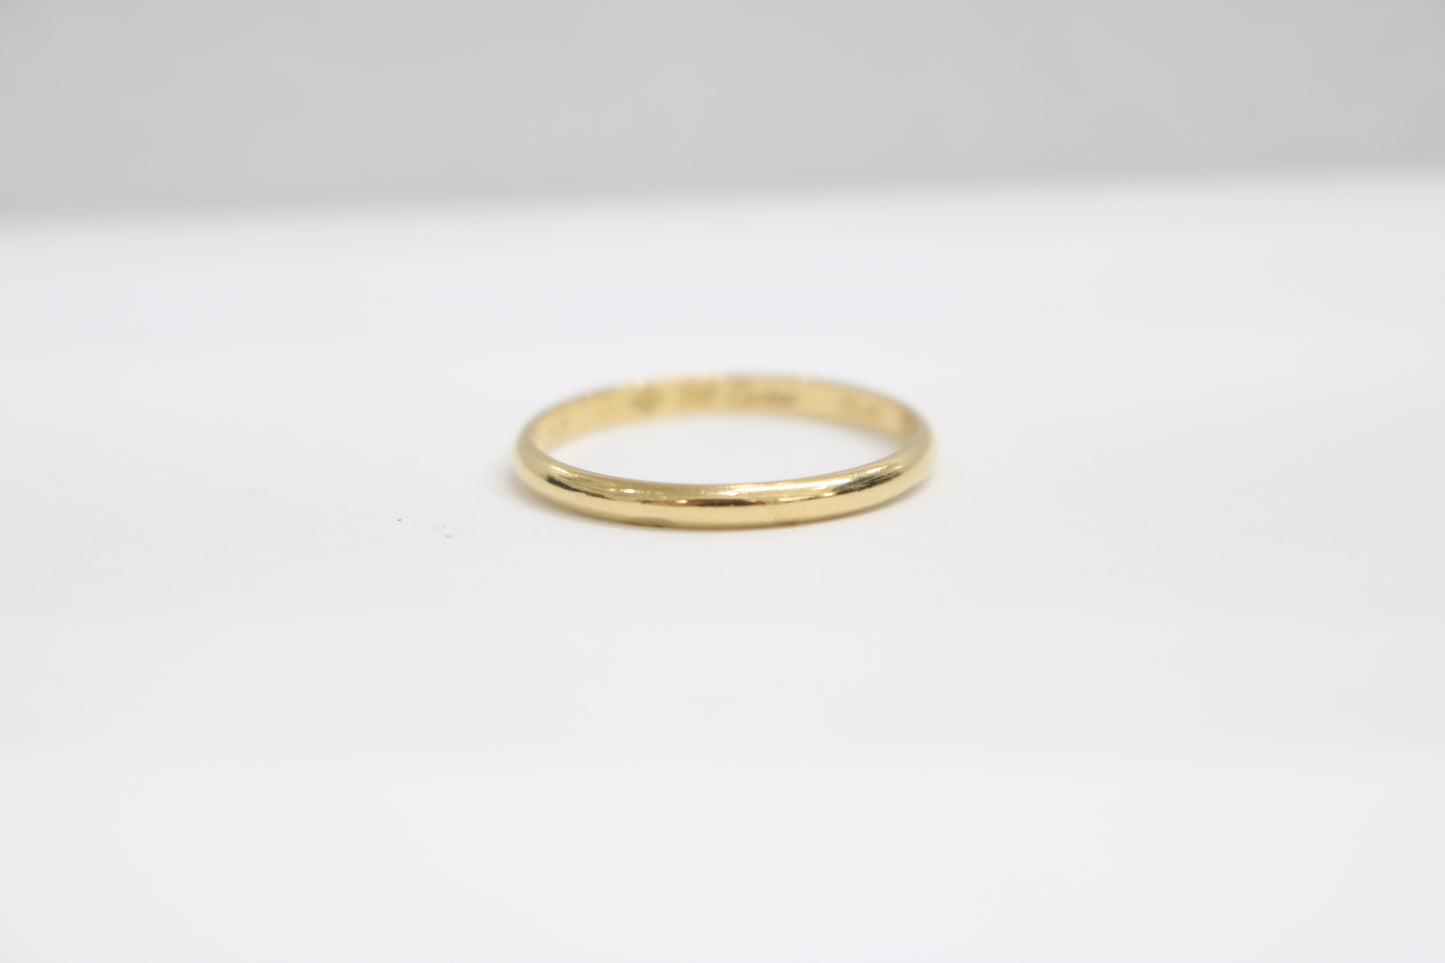 18k Yellow Gold Cartier Wedding Band Ring (Size 6 3/4)